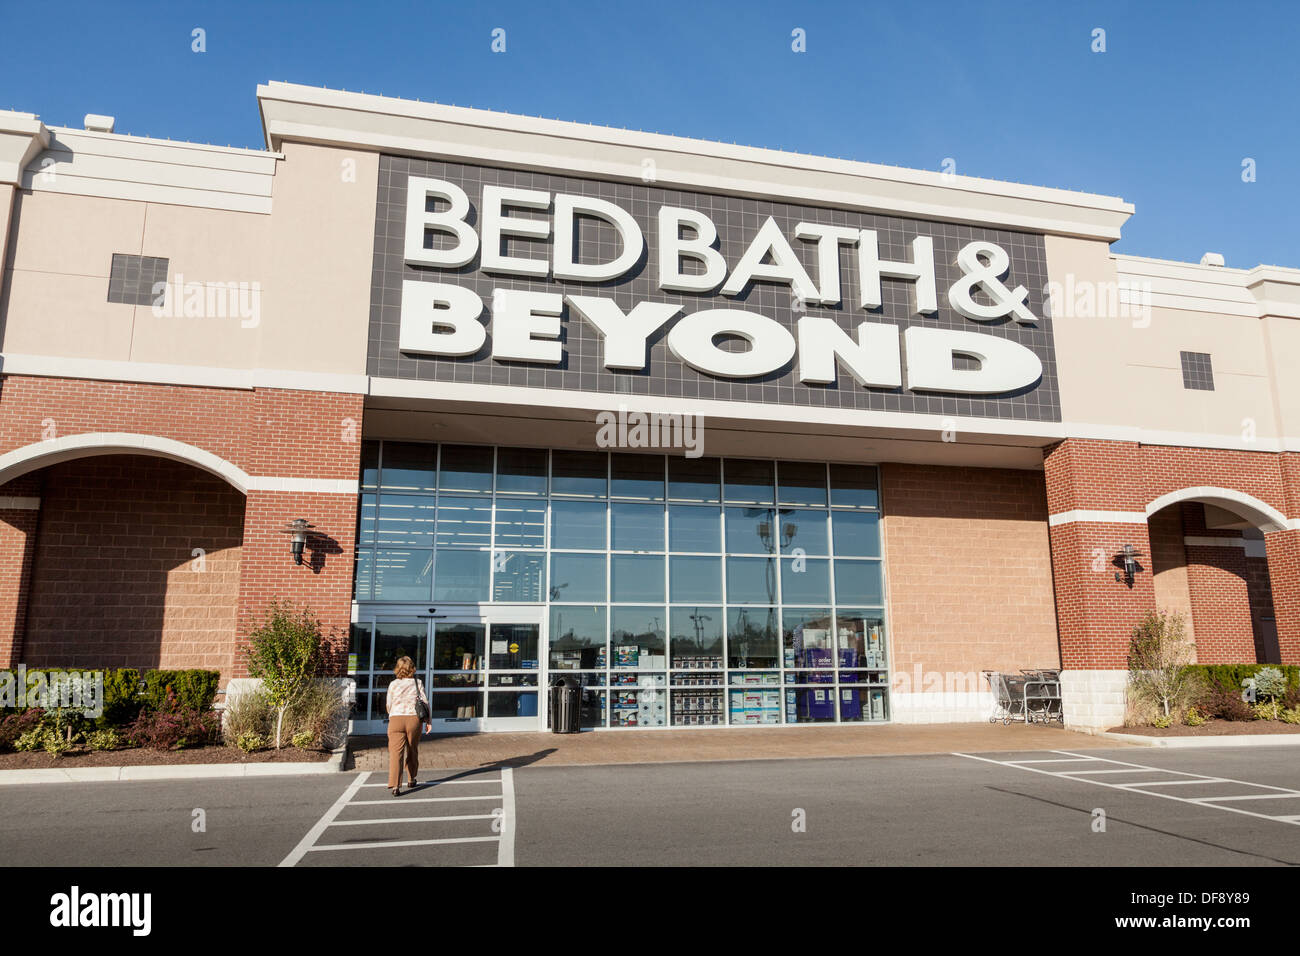 Bed Bath & Beyond, retail box store, this one in Utica, New York State Stock Photo